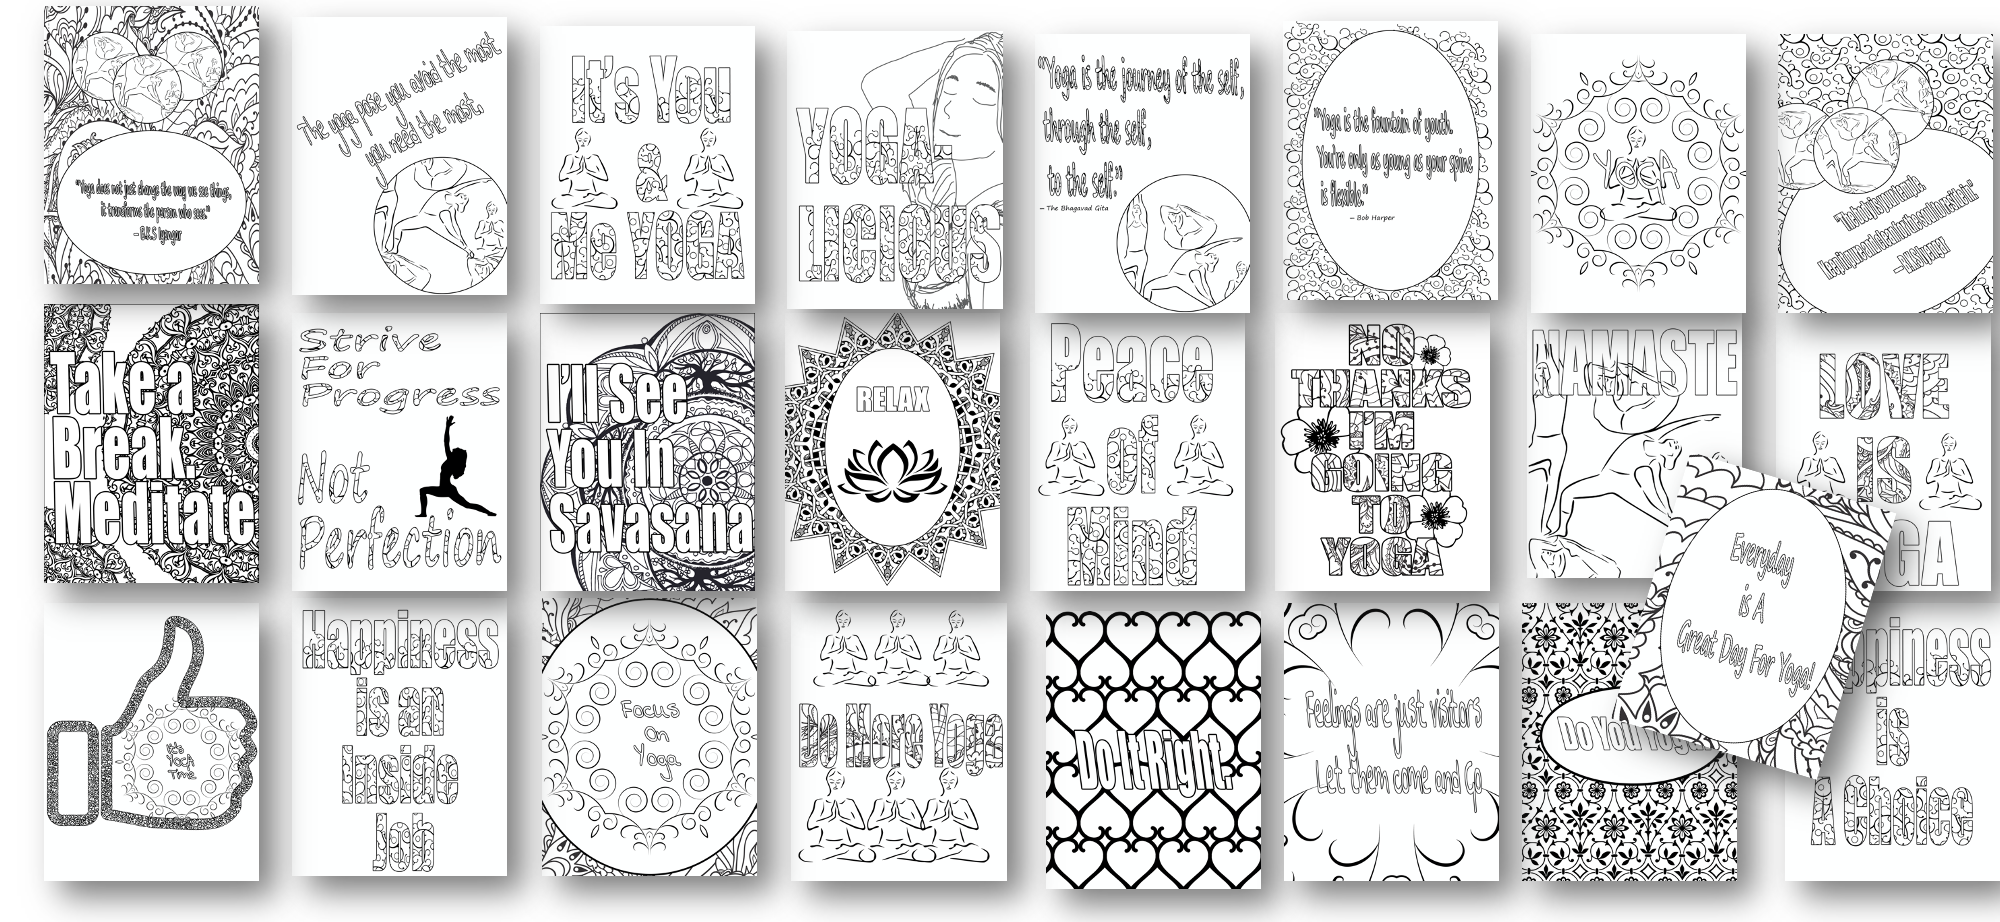 24 More Yoga Coloring Pages